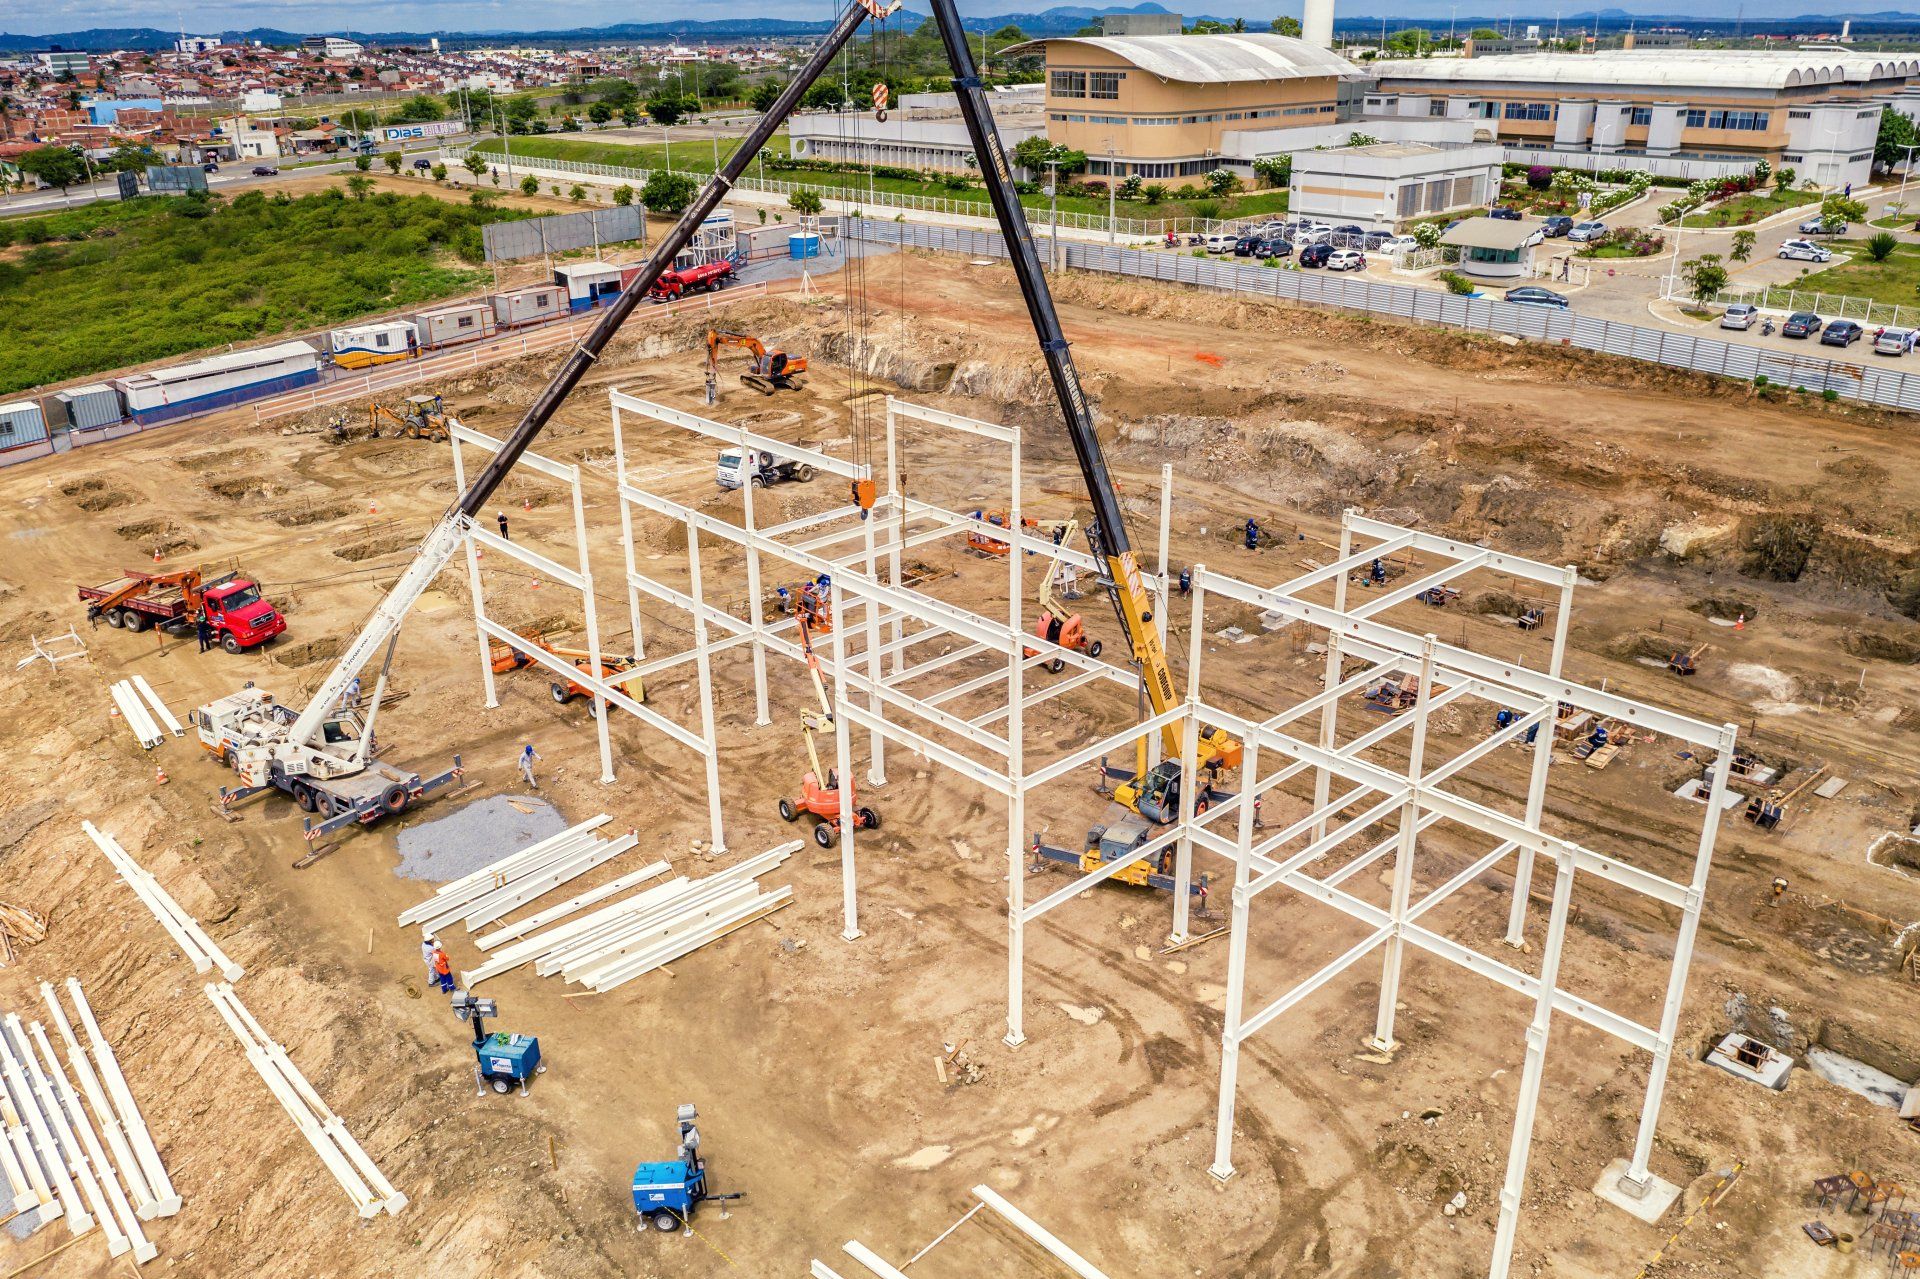 An aerial view of a construction site with a crane lifting a metal structure.